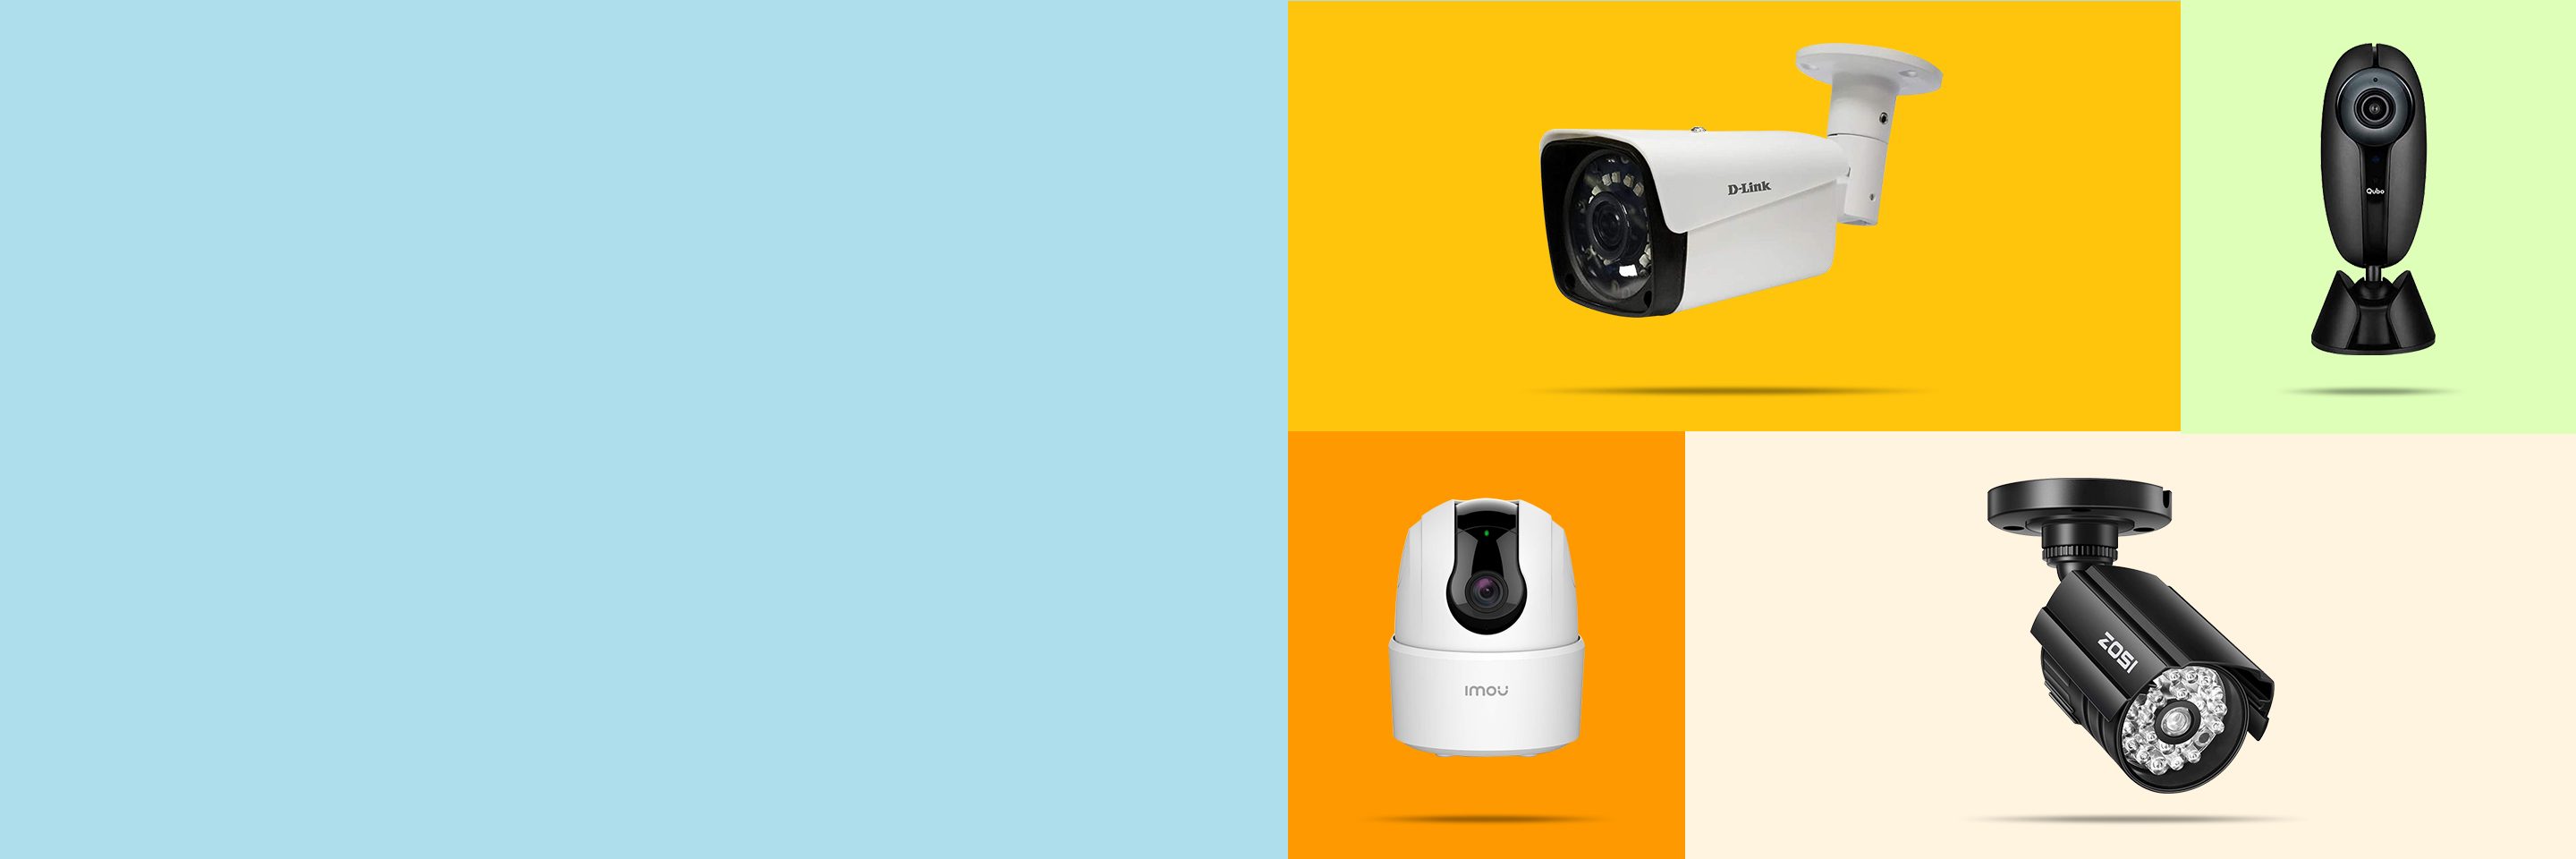 Wholesale Home Security System & Security Cameras	